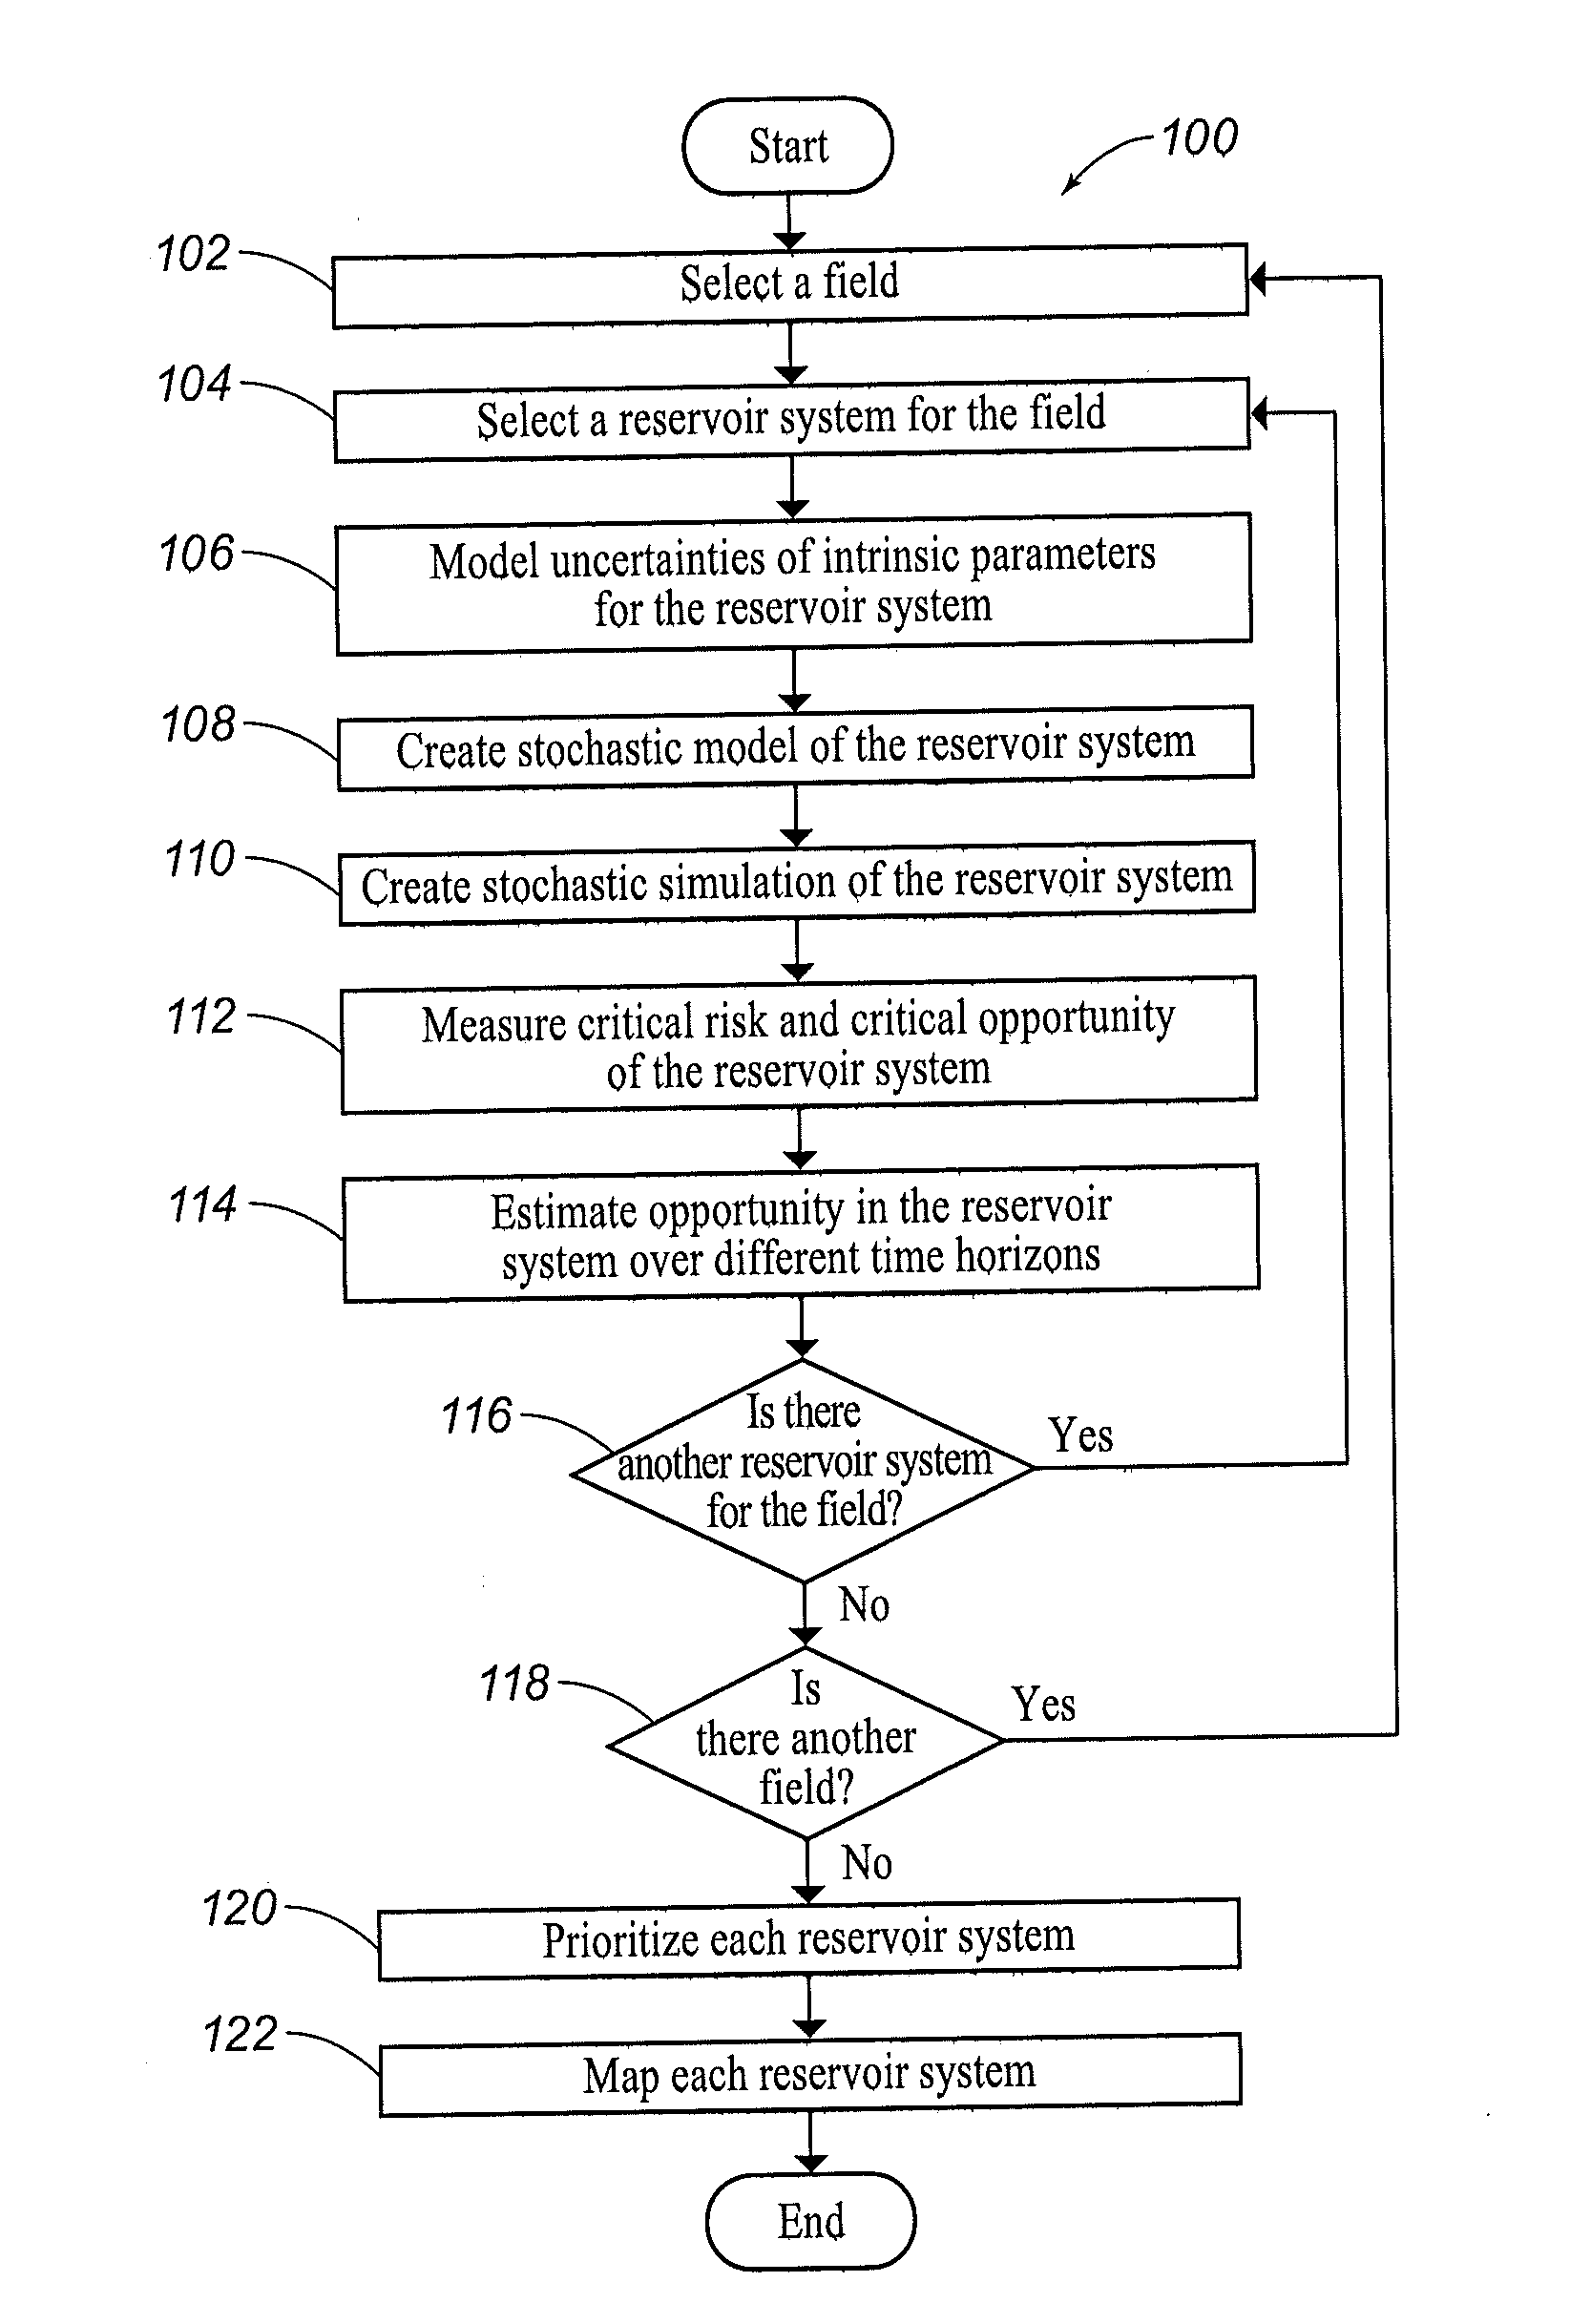 Systems and Methods for Estimating Opportunity in a Reservoir System